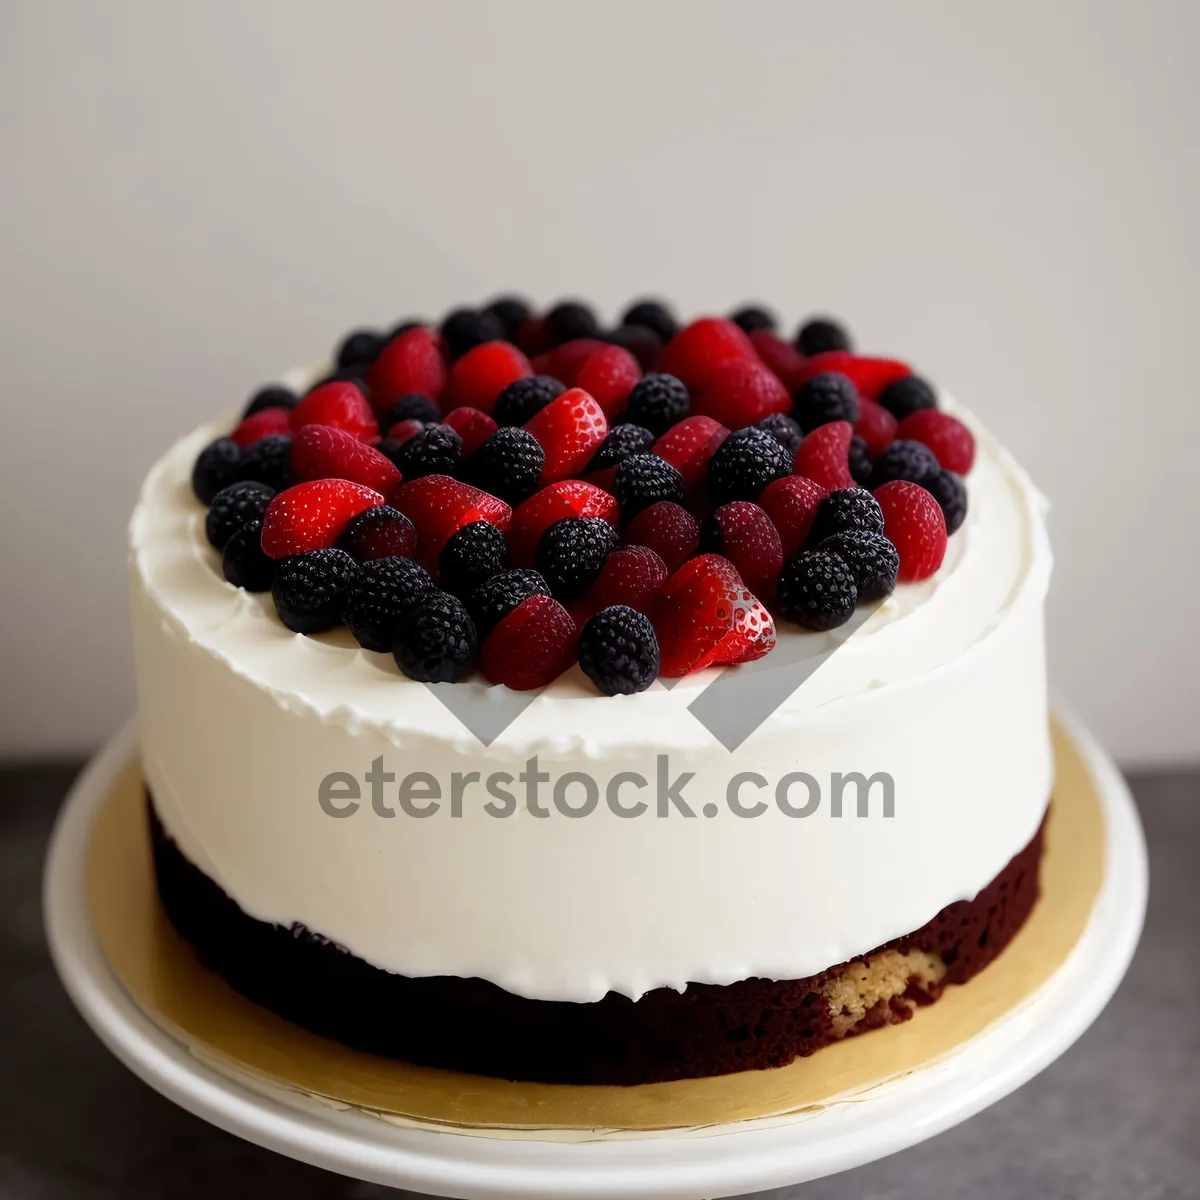 Picture of Delicious Berry Trifle Dessert Loaded with Fresh Fruit